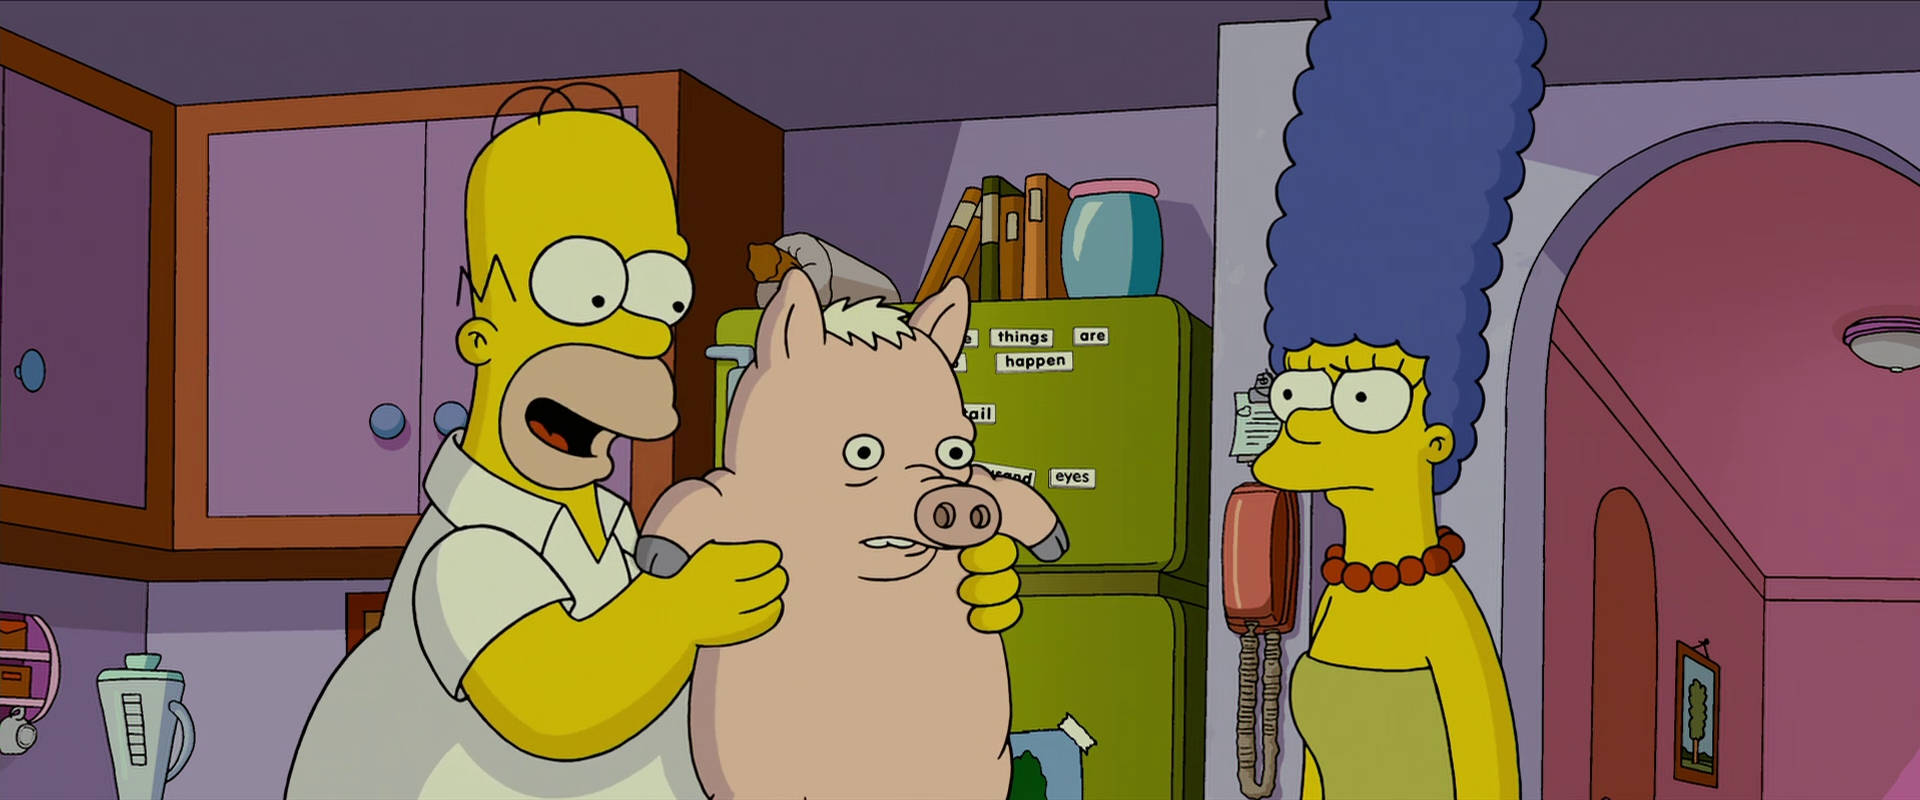 Homer, Marge, and Pig From The Simpsons Movie Wallpaper